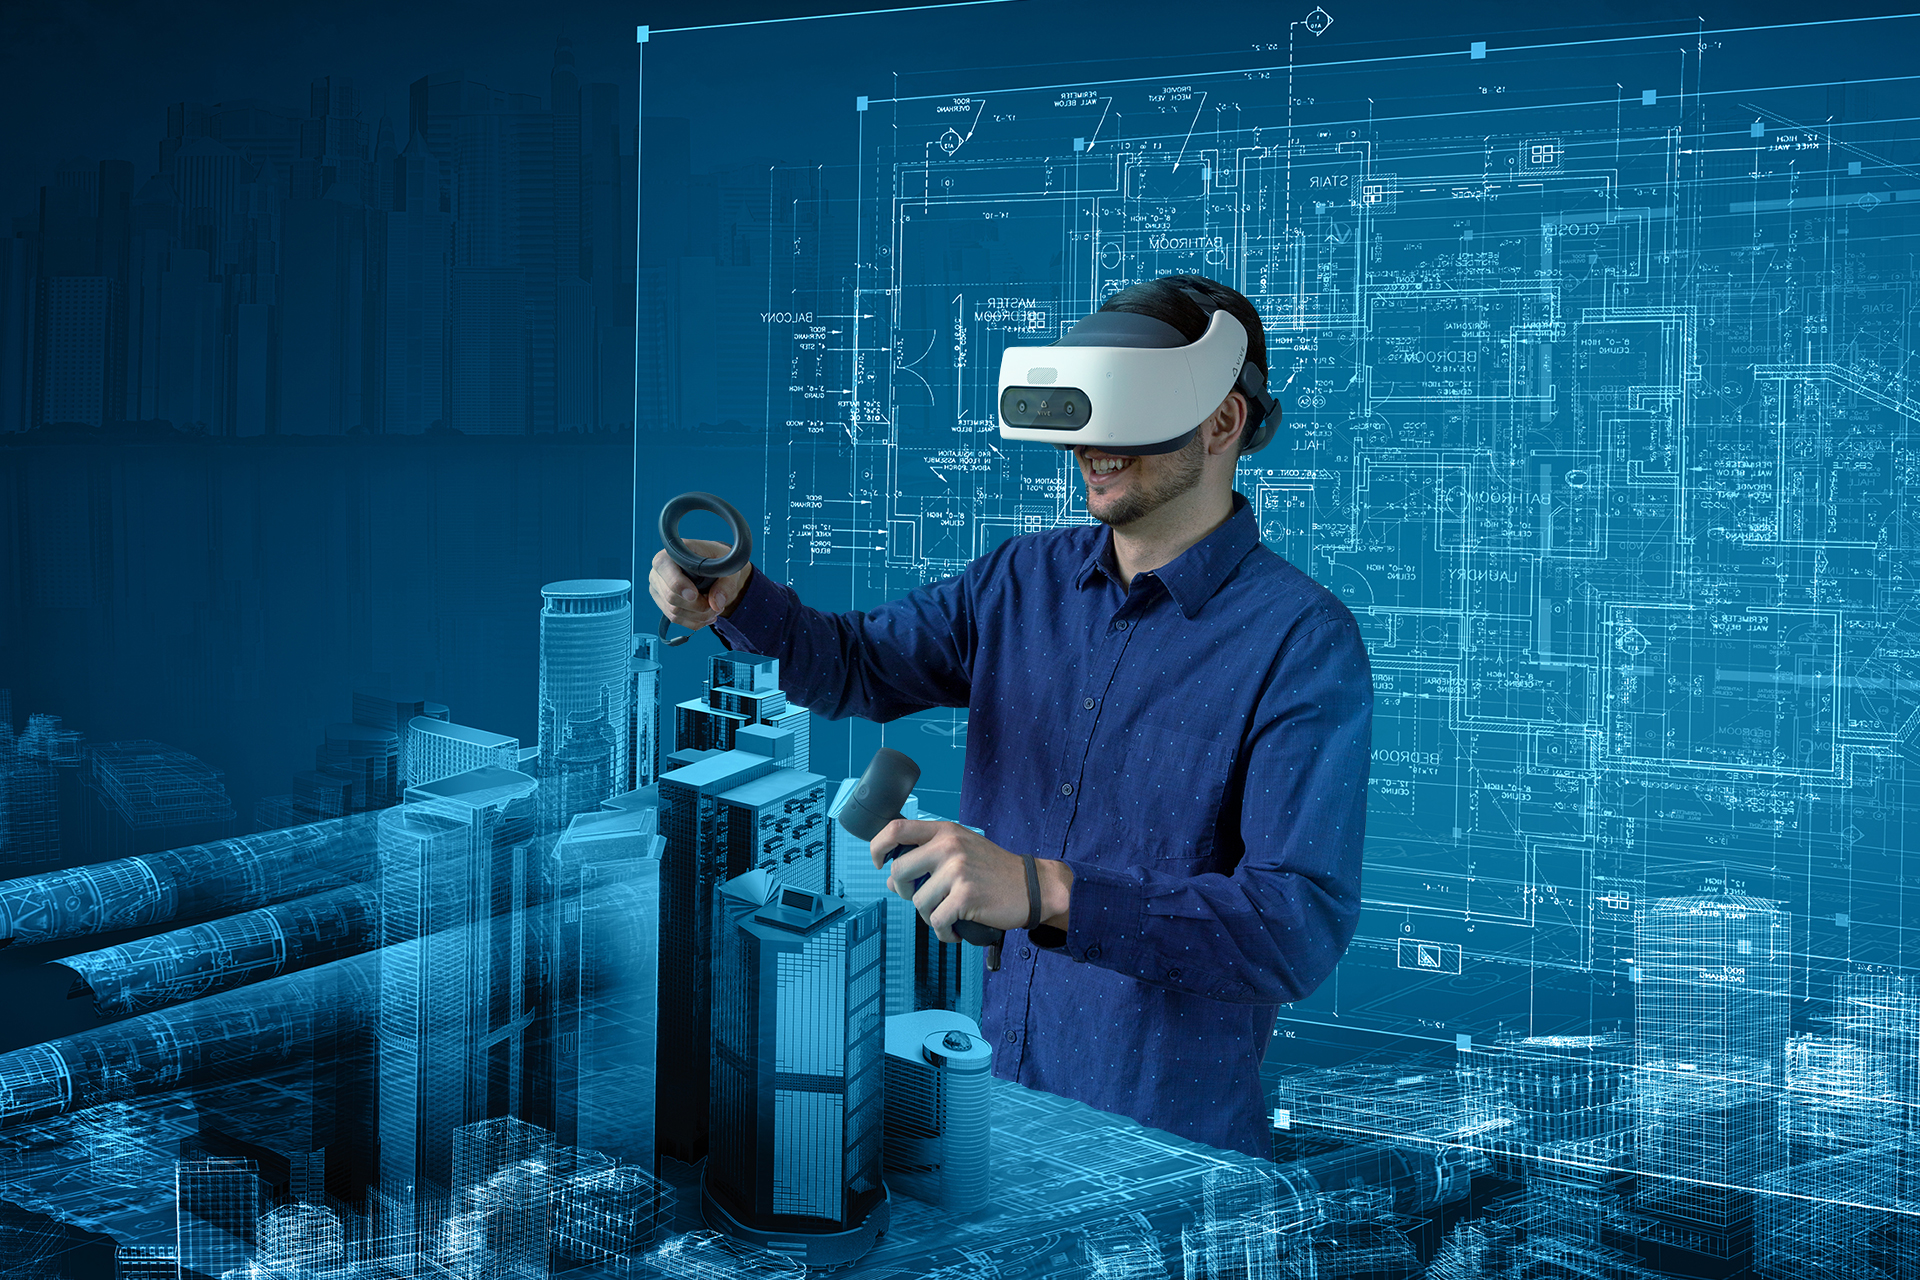 With virtual reality technology, Motorola Solutions 